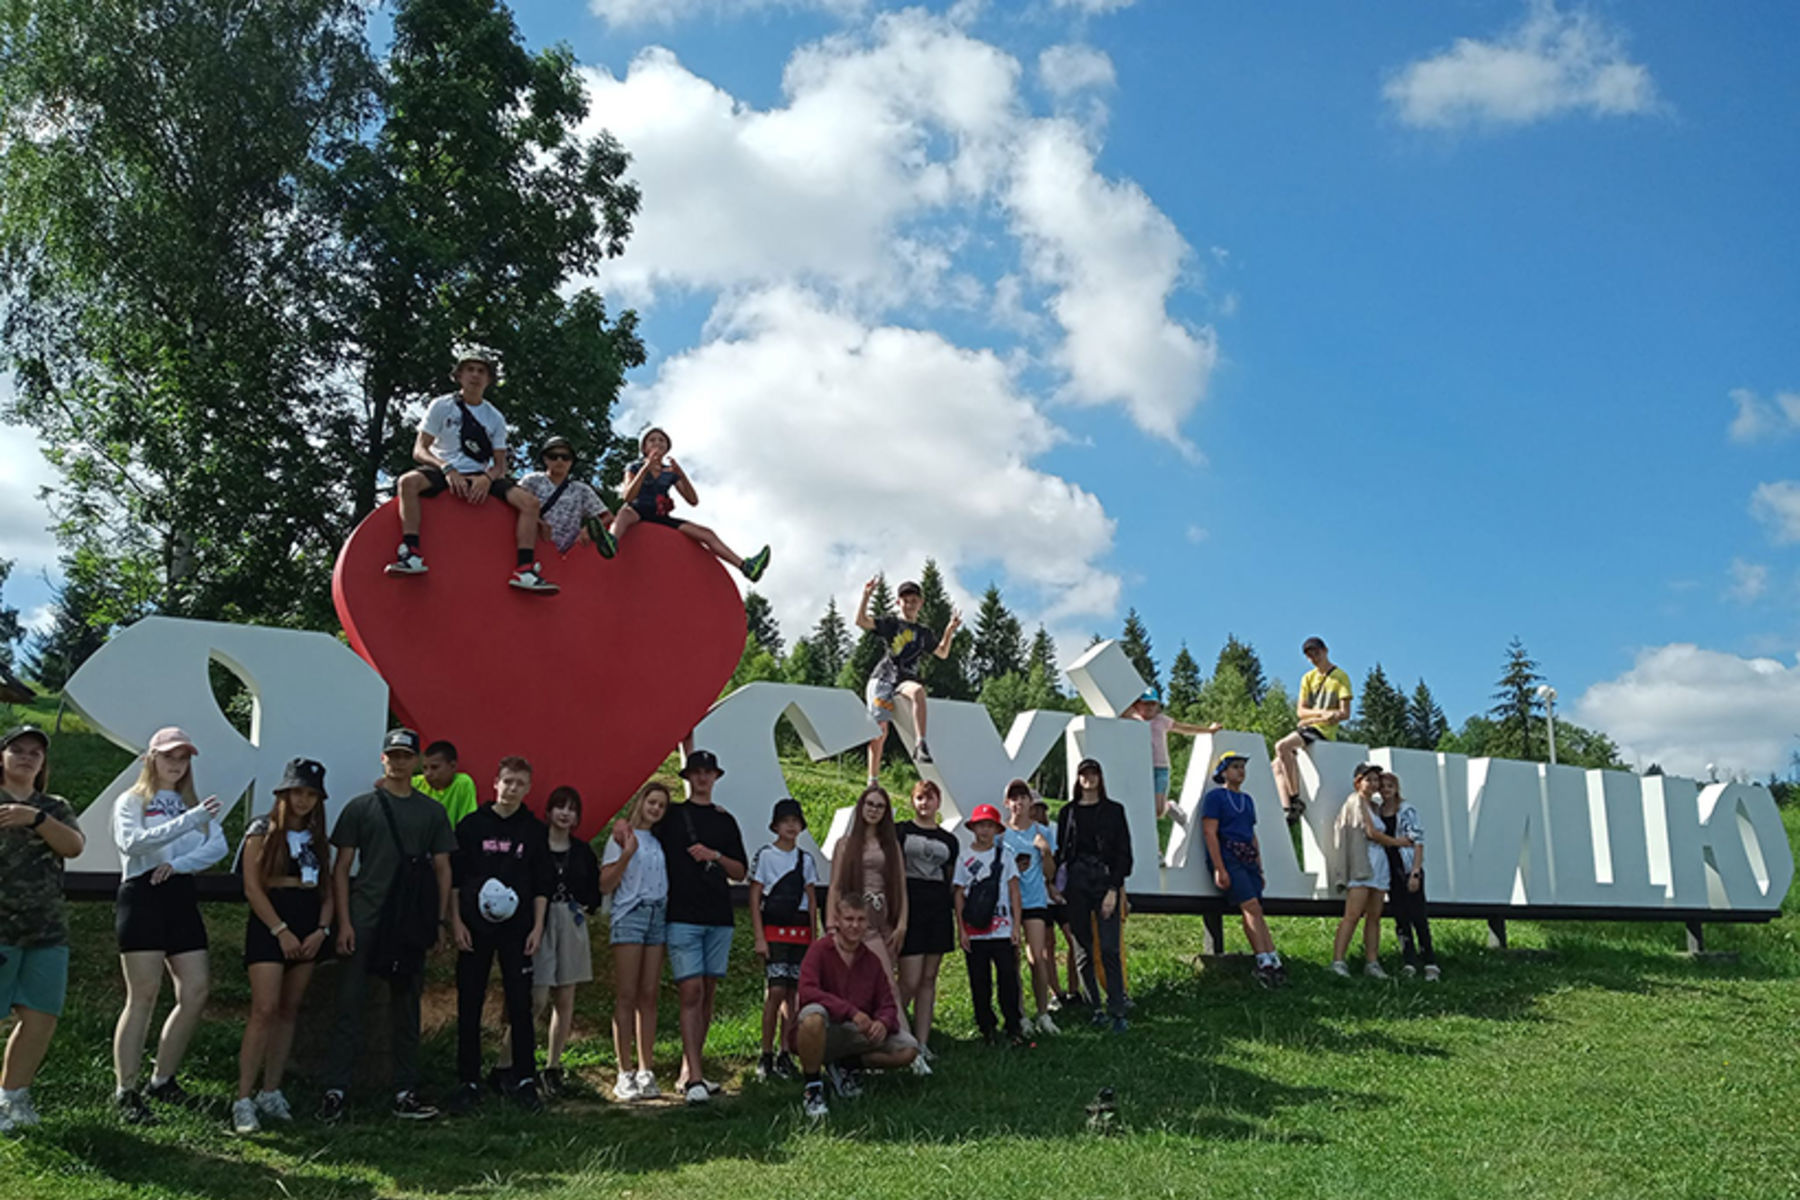 “The reconstruction of Ukraine begins with the healing of hearts,” — Bishop Bohdan Dzyurakh about the summer camp for children from eastern Ukraine